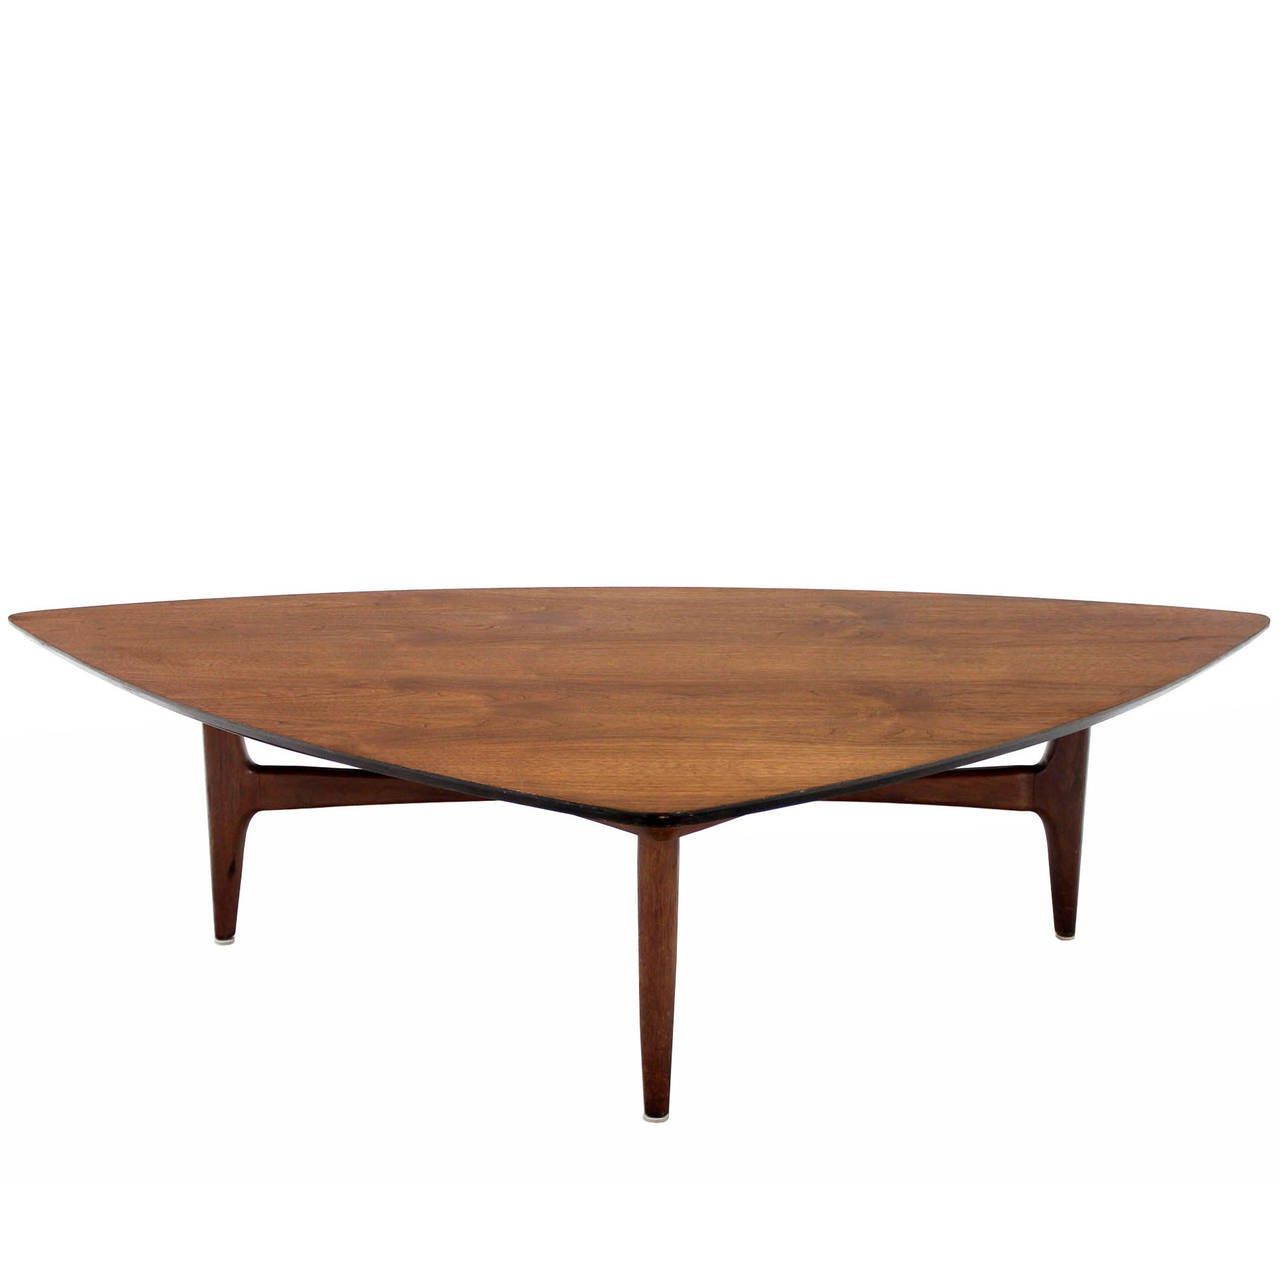 Most Up To Date White Triangular Coffee Tables Intended For Triangular Surfboard Shape Walnut Coffee Table At 1stdibs (View 11 of 20)